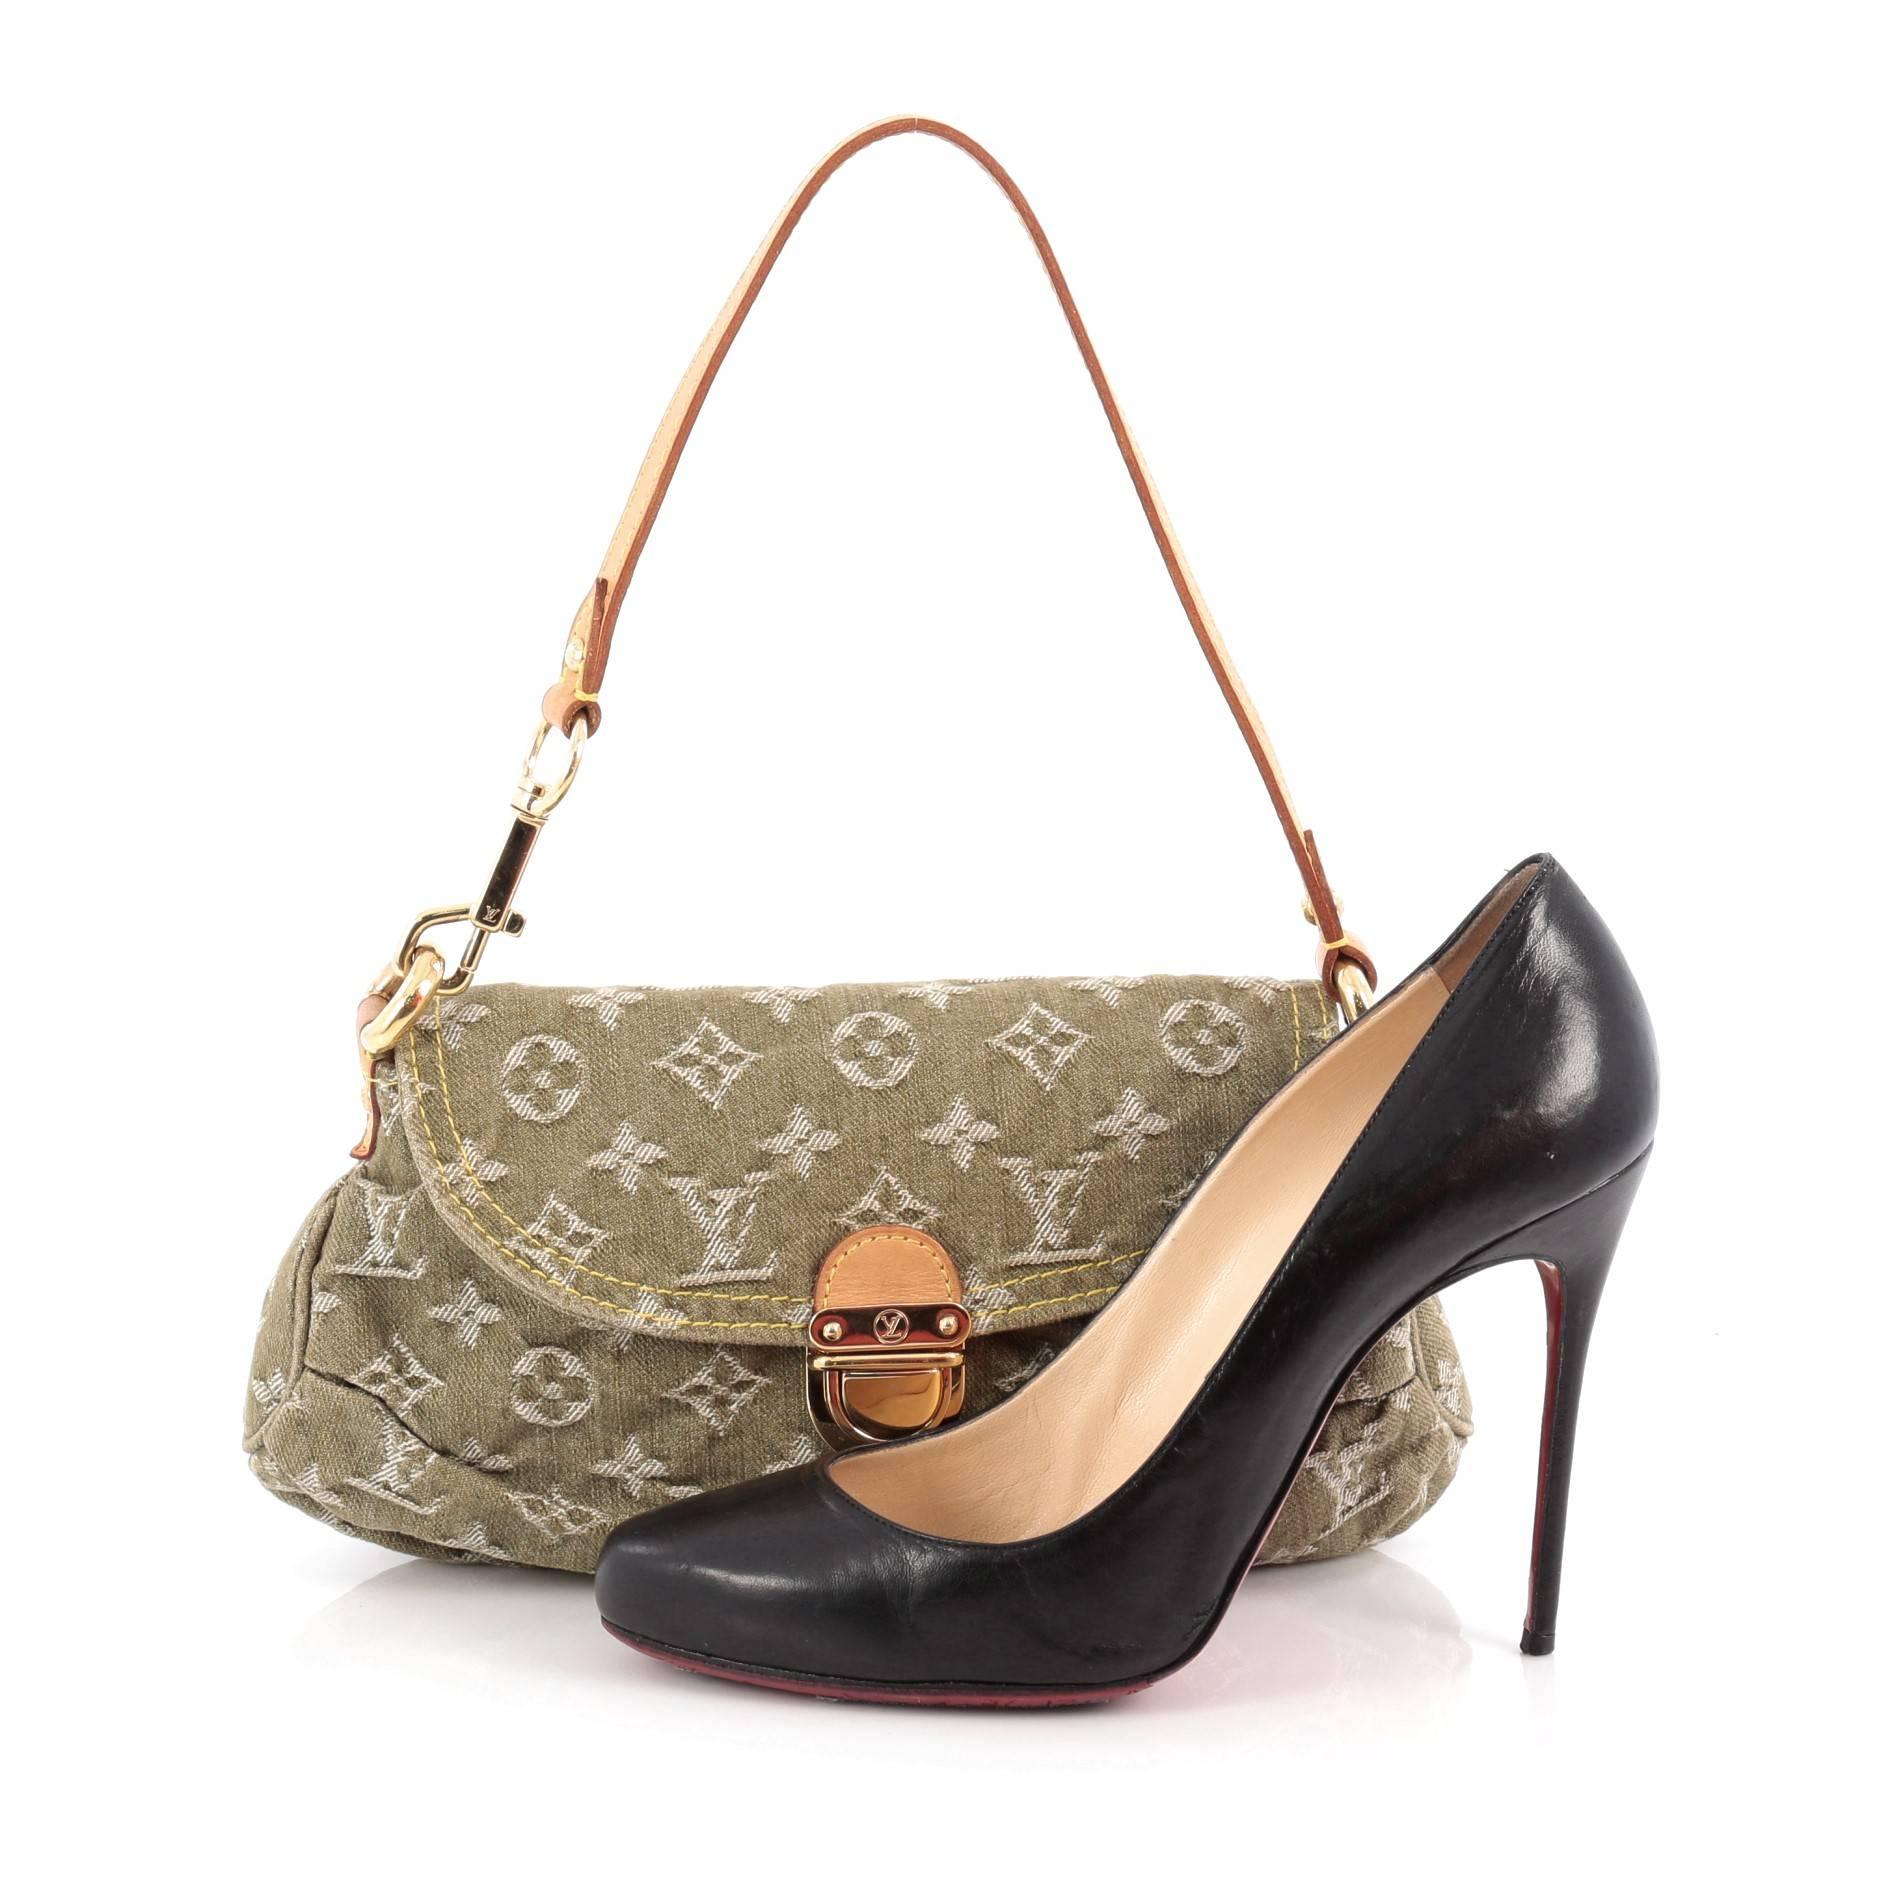 This authentic Louis Vuitton Pleaty Handbag Denim Mini is a fun and flirty bag from the brand's Monogram Denim collection. Crafted from green monogram denim, this mini shoulder bag features an adjustable vachetta leather handle allowing it to